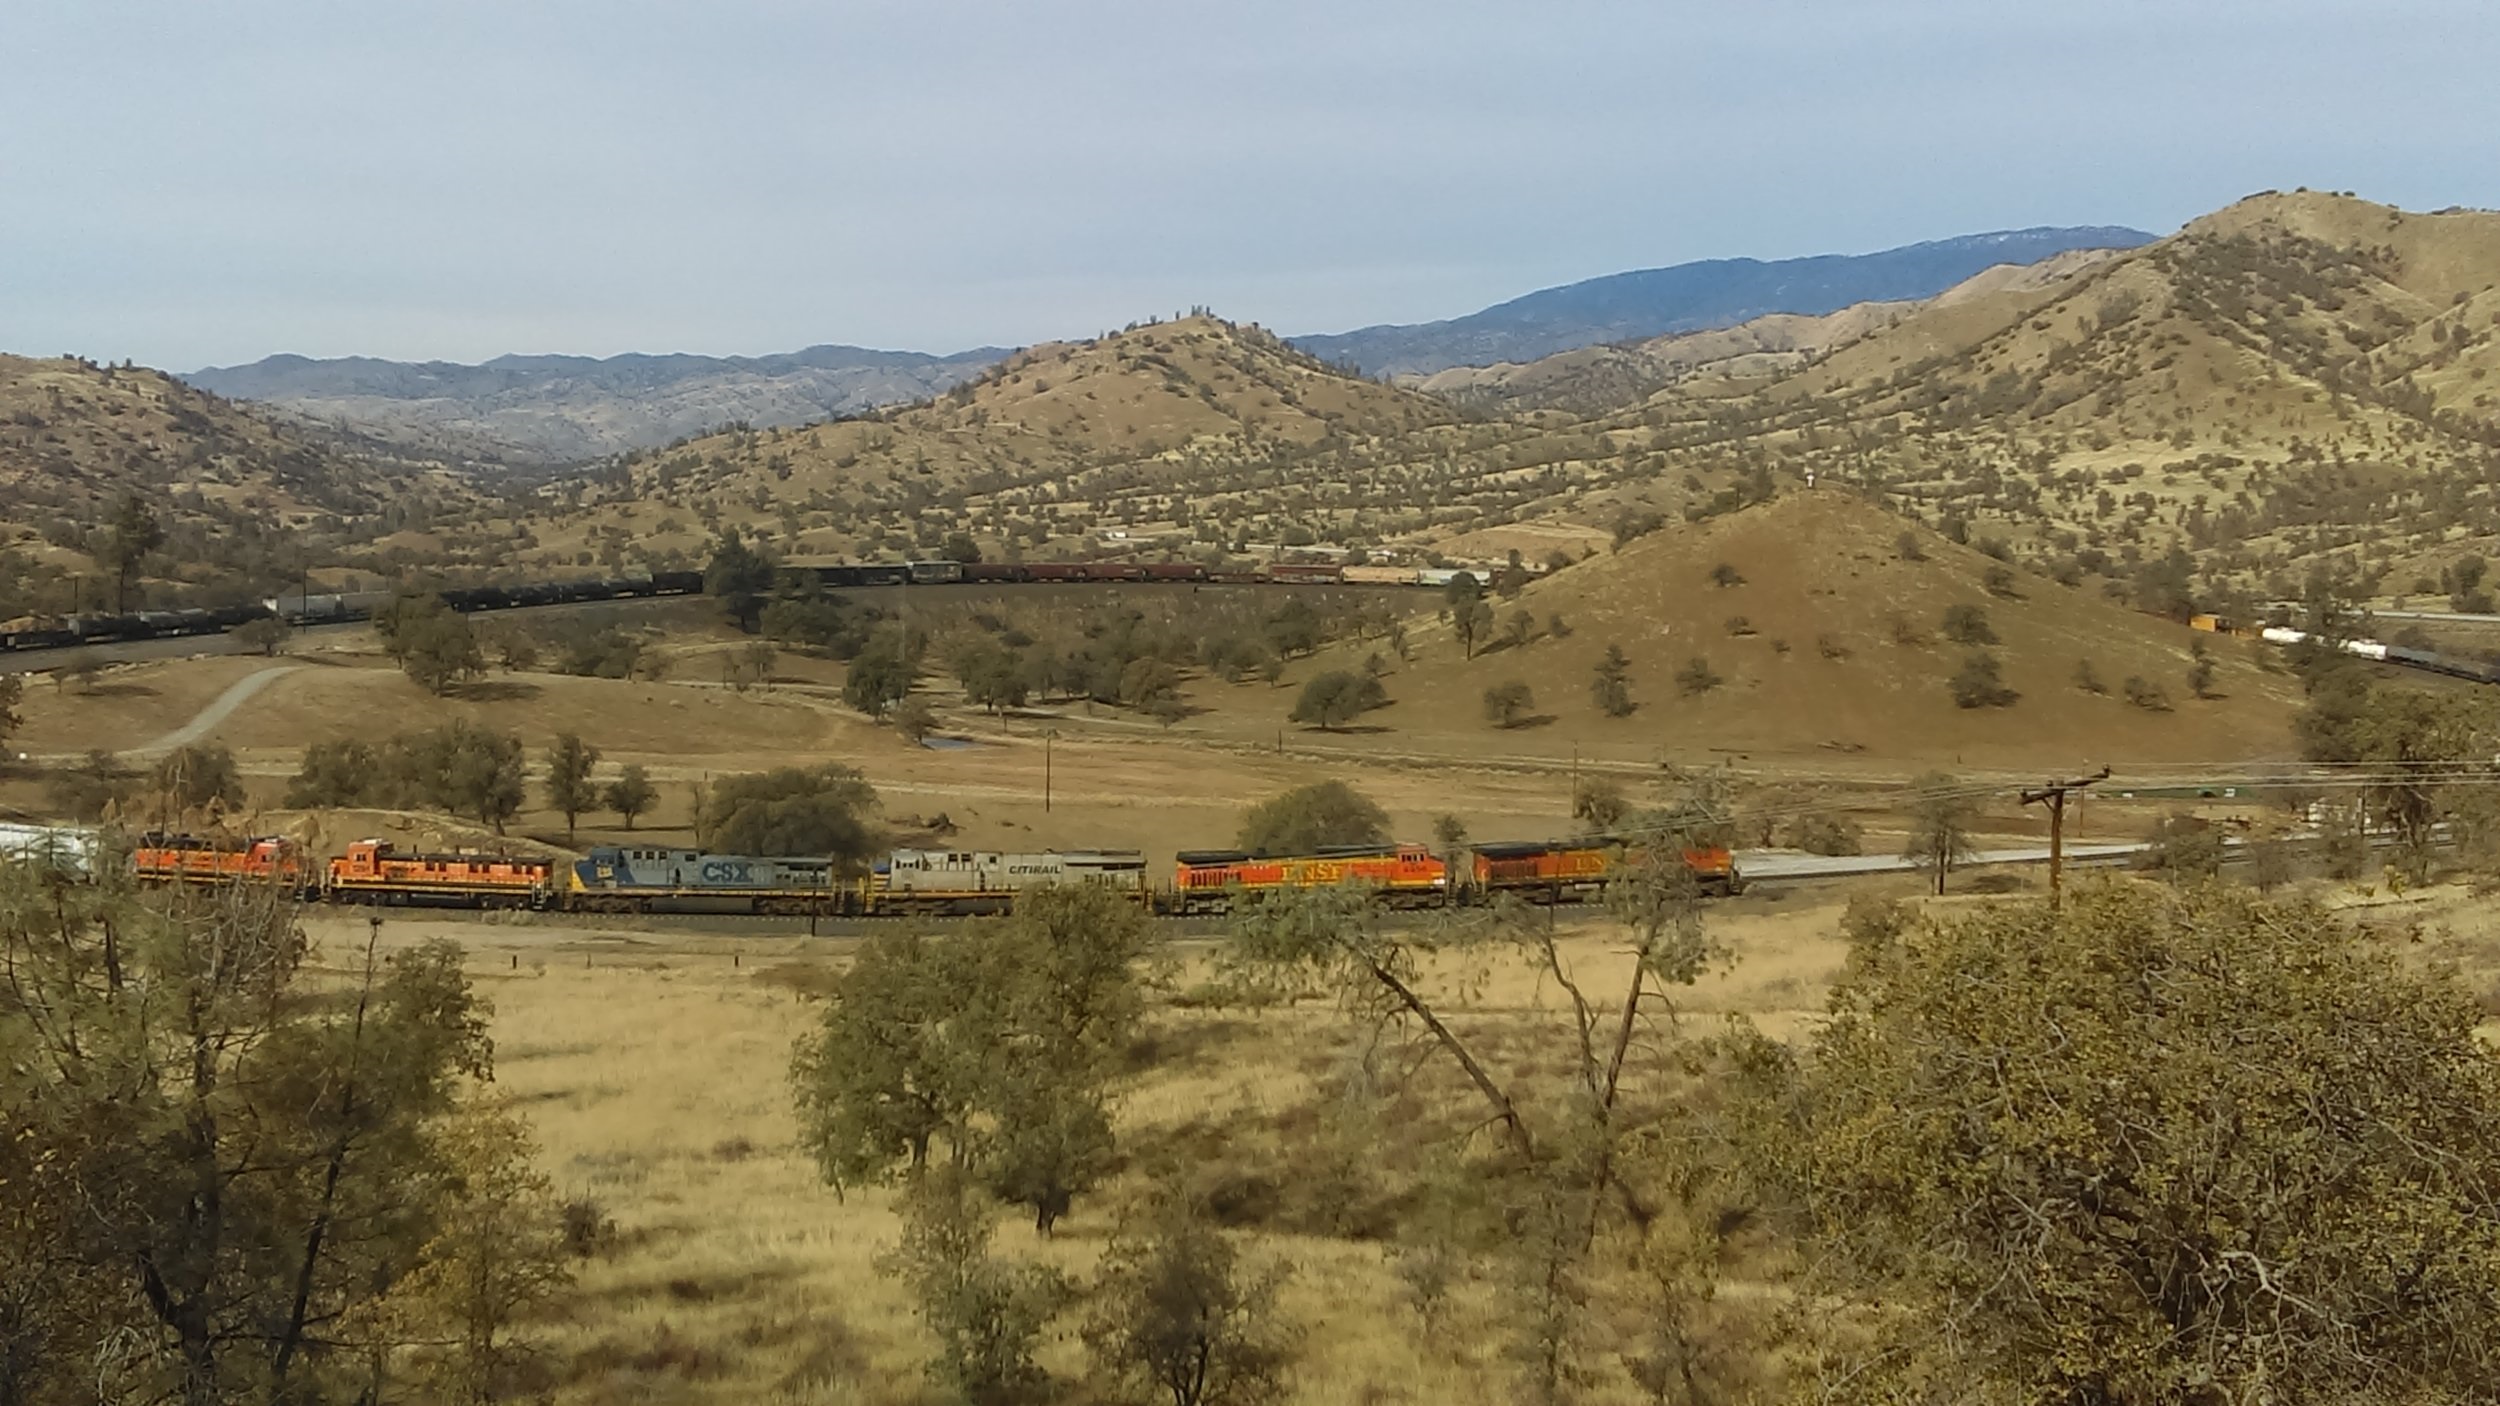  Built in 1876, the Tehachapi Pass Line was the first railroad into Southern California. To keep the incline to a steady 2.2% grade, the line makes multiple sweeping curves and crosses over itself halfway up the grade to Tehachapi, in Walong, CA. In 